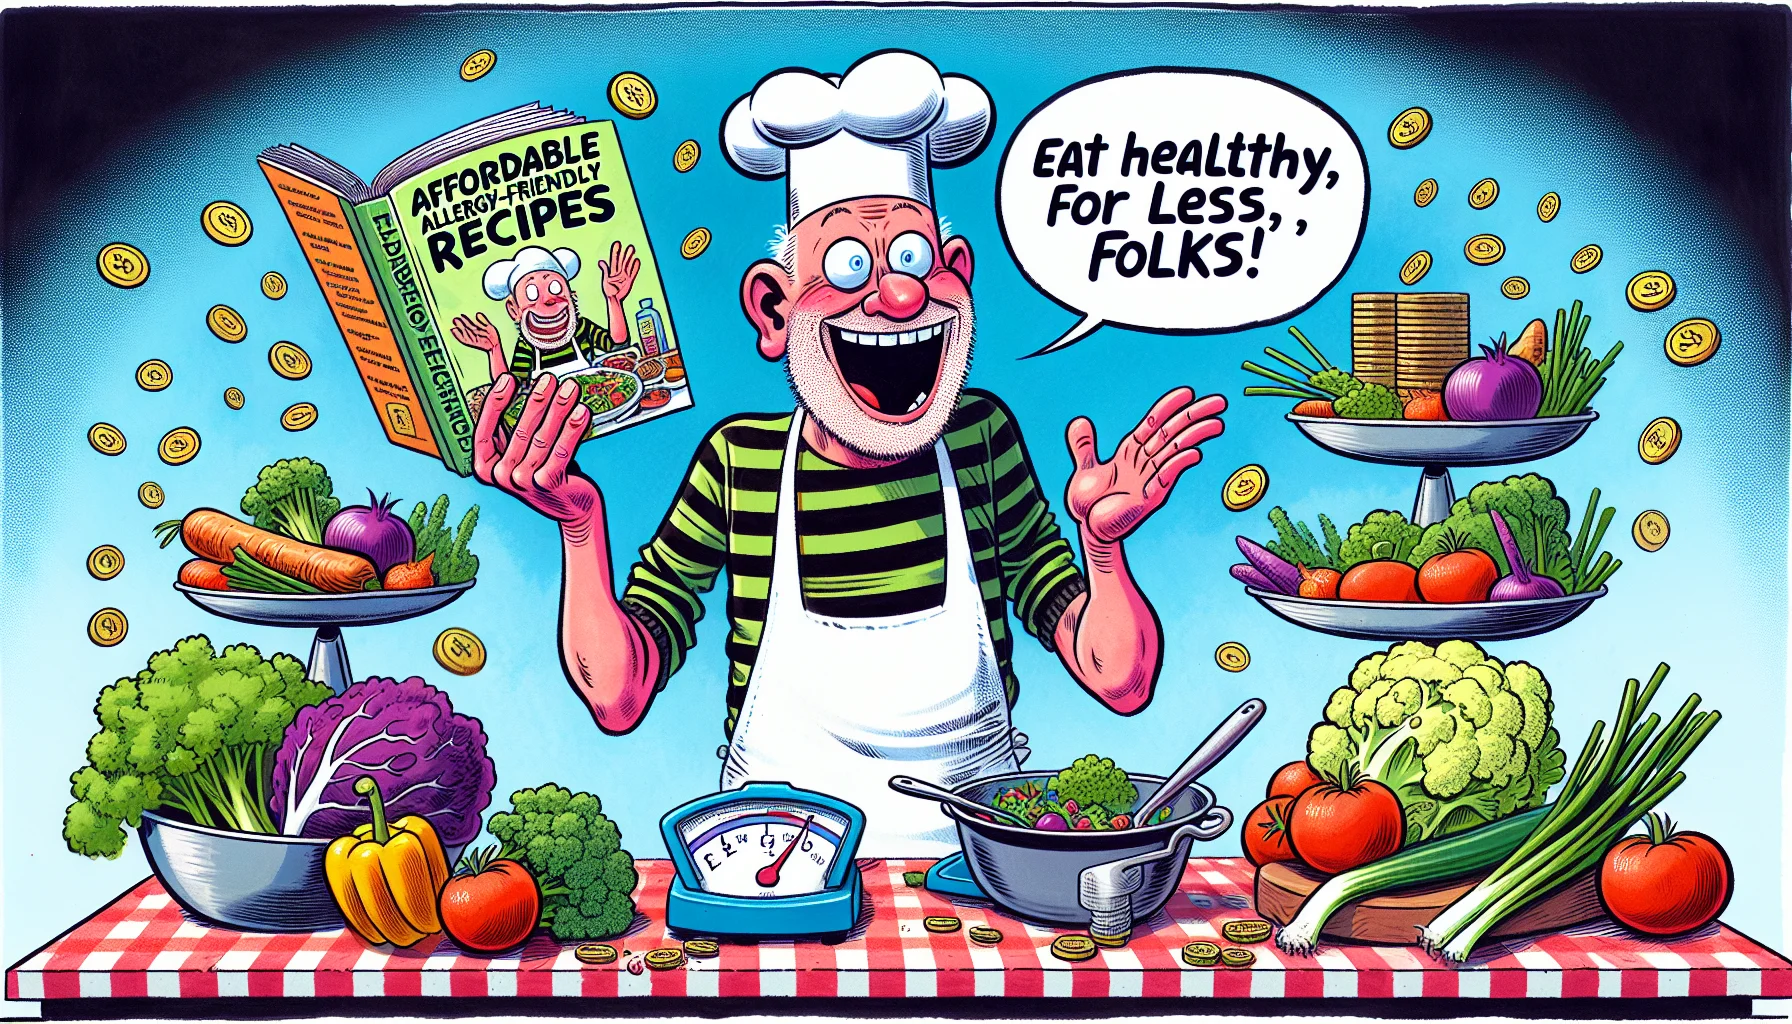 Imagine a hilarious, well-illustrated scene in a vibrant, high-energy kitchen. A middle-aged Caucasian man with a chef's hat and apron is preparing a dish using colourful, fresh vegetables. He is looking at a cookbook titled 'Affordable Allergy-Friendly Recipes', his facial expression is one of joyful surprise looking at easy and affordable directions. There's a balance scale next to him, one side has coins and the other has a plate of healthy food, suggesting that healthy eating can be cheap. A speech bubble coming from him reads, 'Eat Healthy For Less, Folks!' making it comedic and inviting.